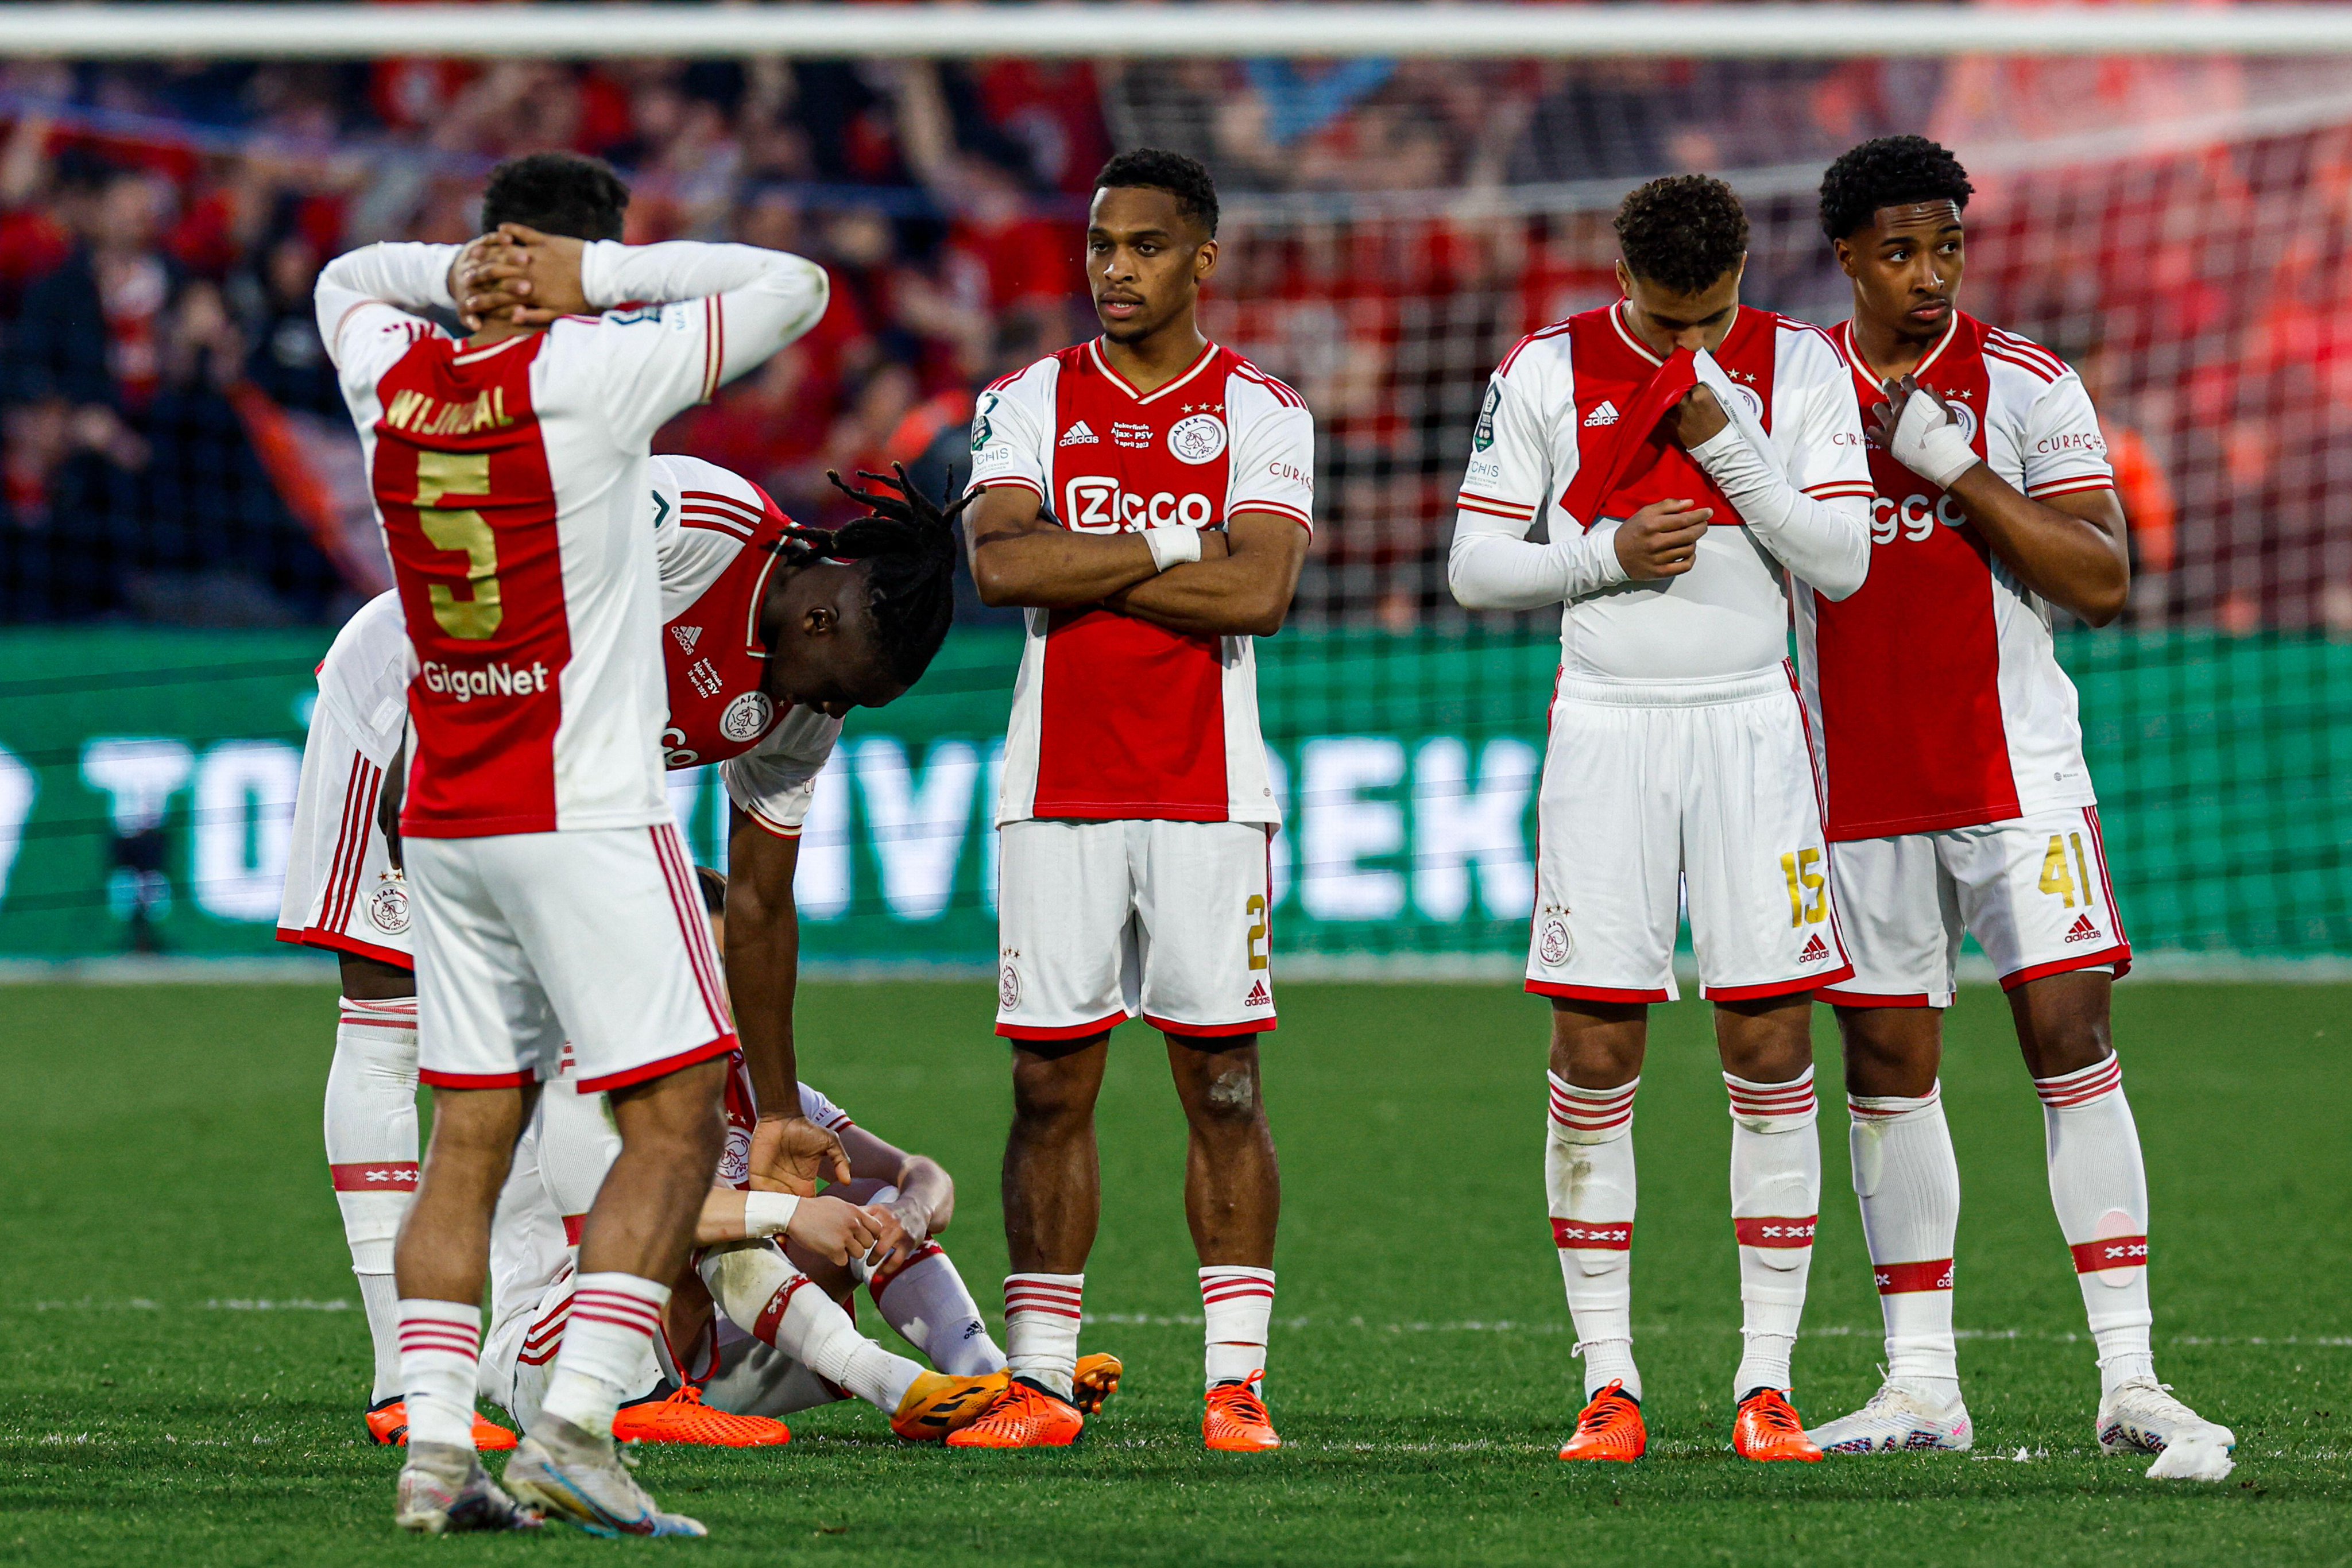 Wetland Opsommen in de tussentijd Squawka on Twitter: "Ajax will finish the season without winning a single  trophy for the first time since 2017/18. And they might not qualify for the  Champions League. 😳 https://t.co/Uir0b4392j" / Twitter